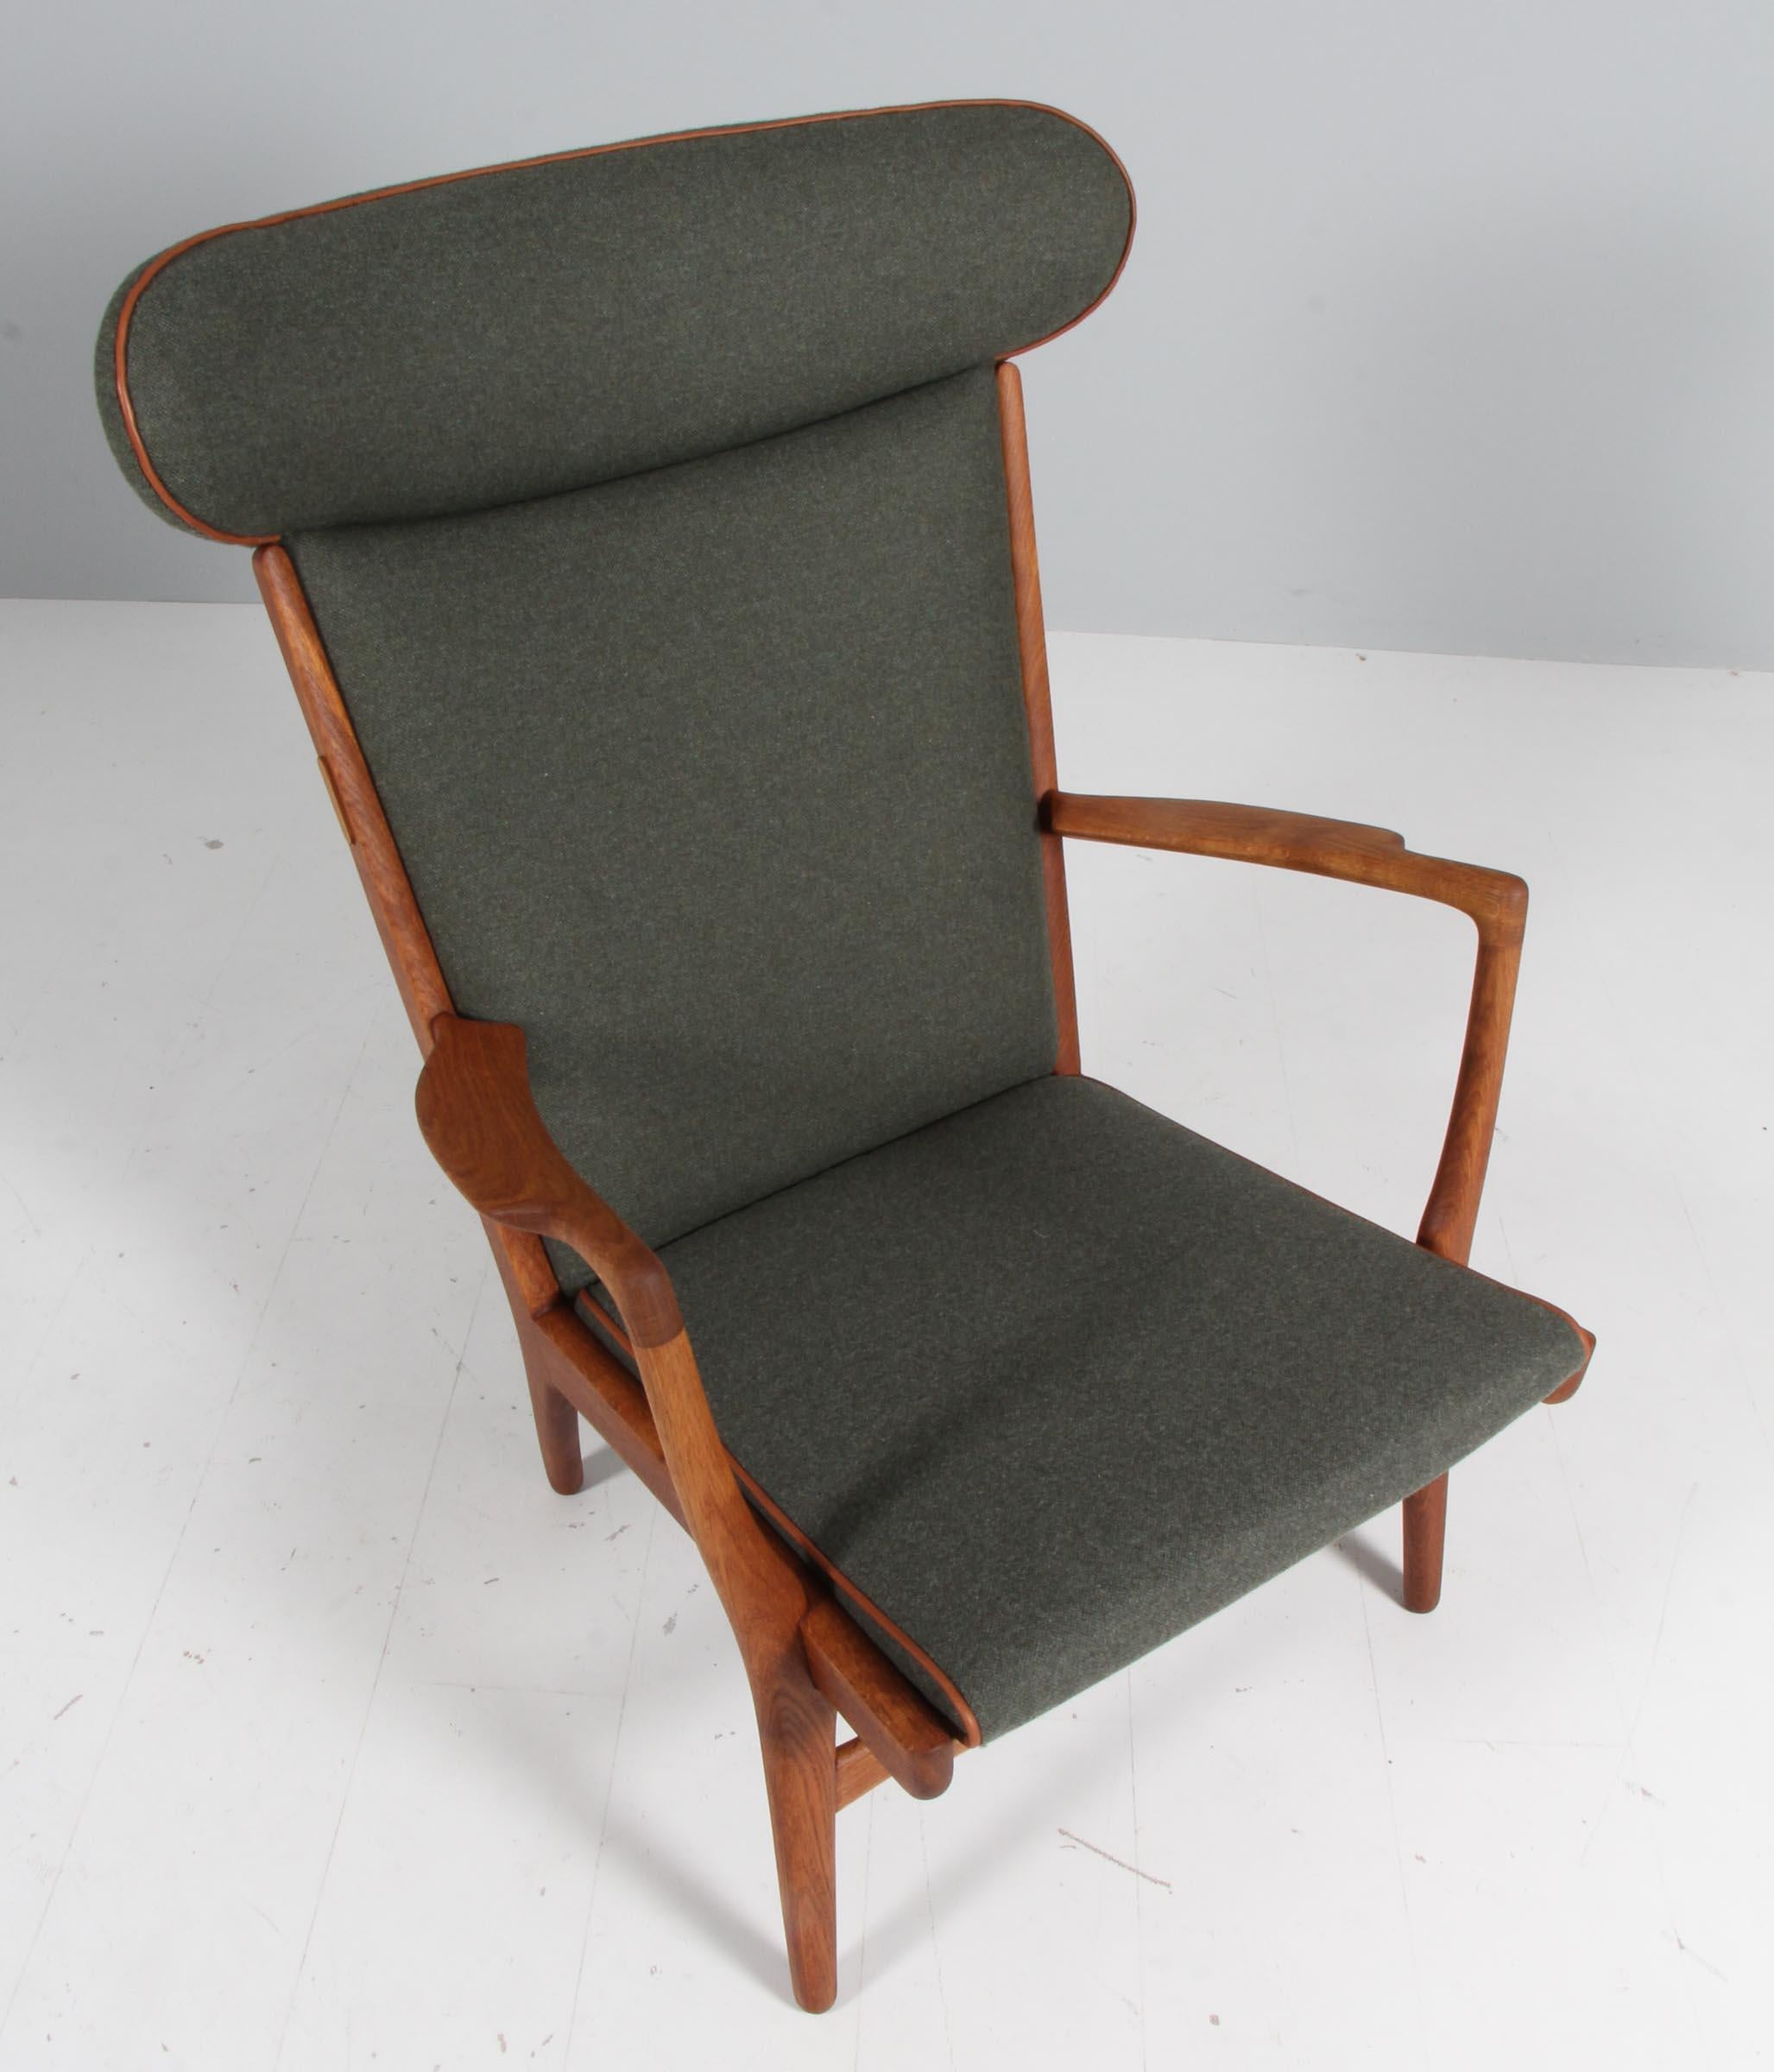 Designed by Hans Wegner in 1951 and produced by A.P. Stolen, this sturdy armchair, model AP15, features an oakframe with a broad curved back and carved armrests. New upholstered with full grain aniline leather details and green wool fabric